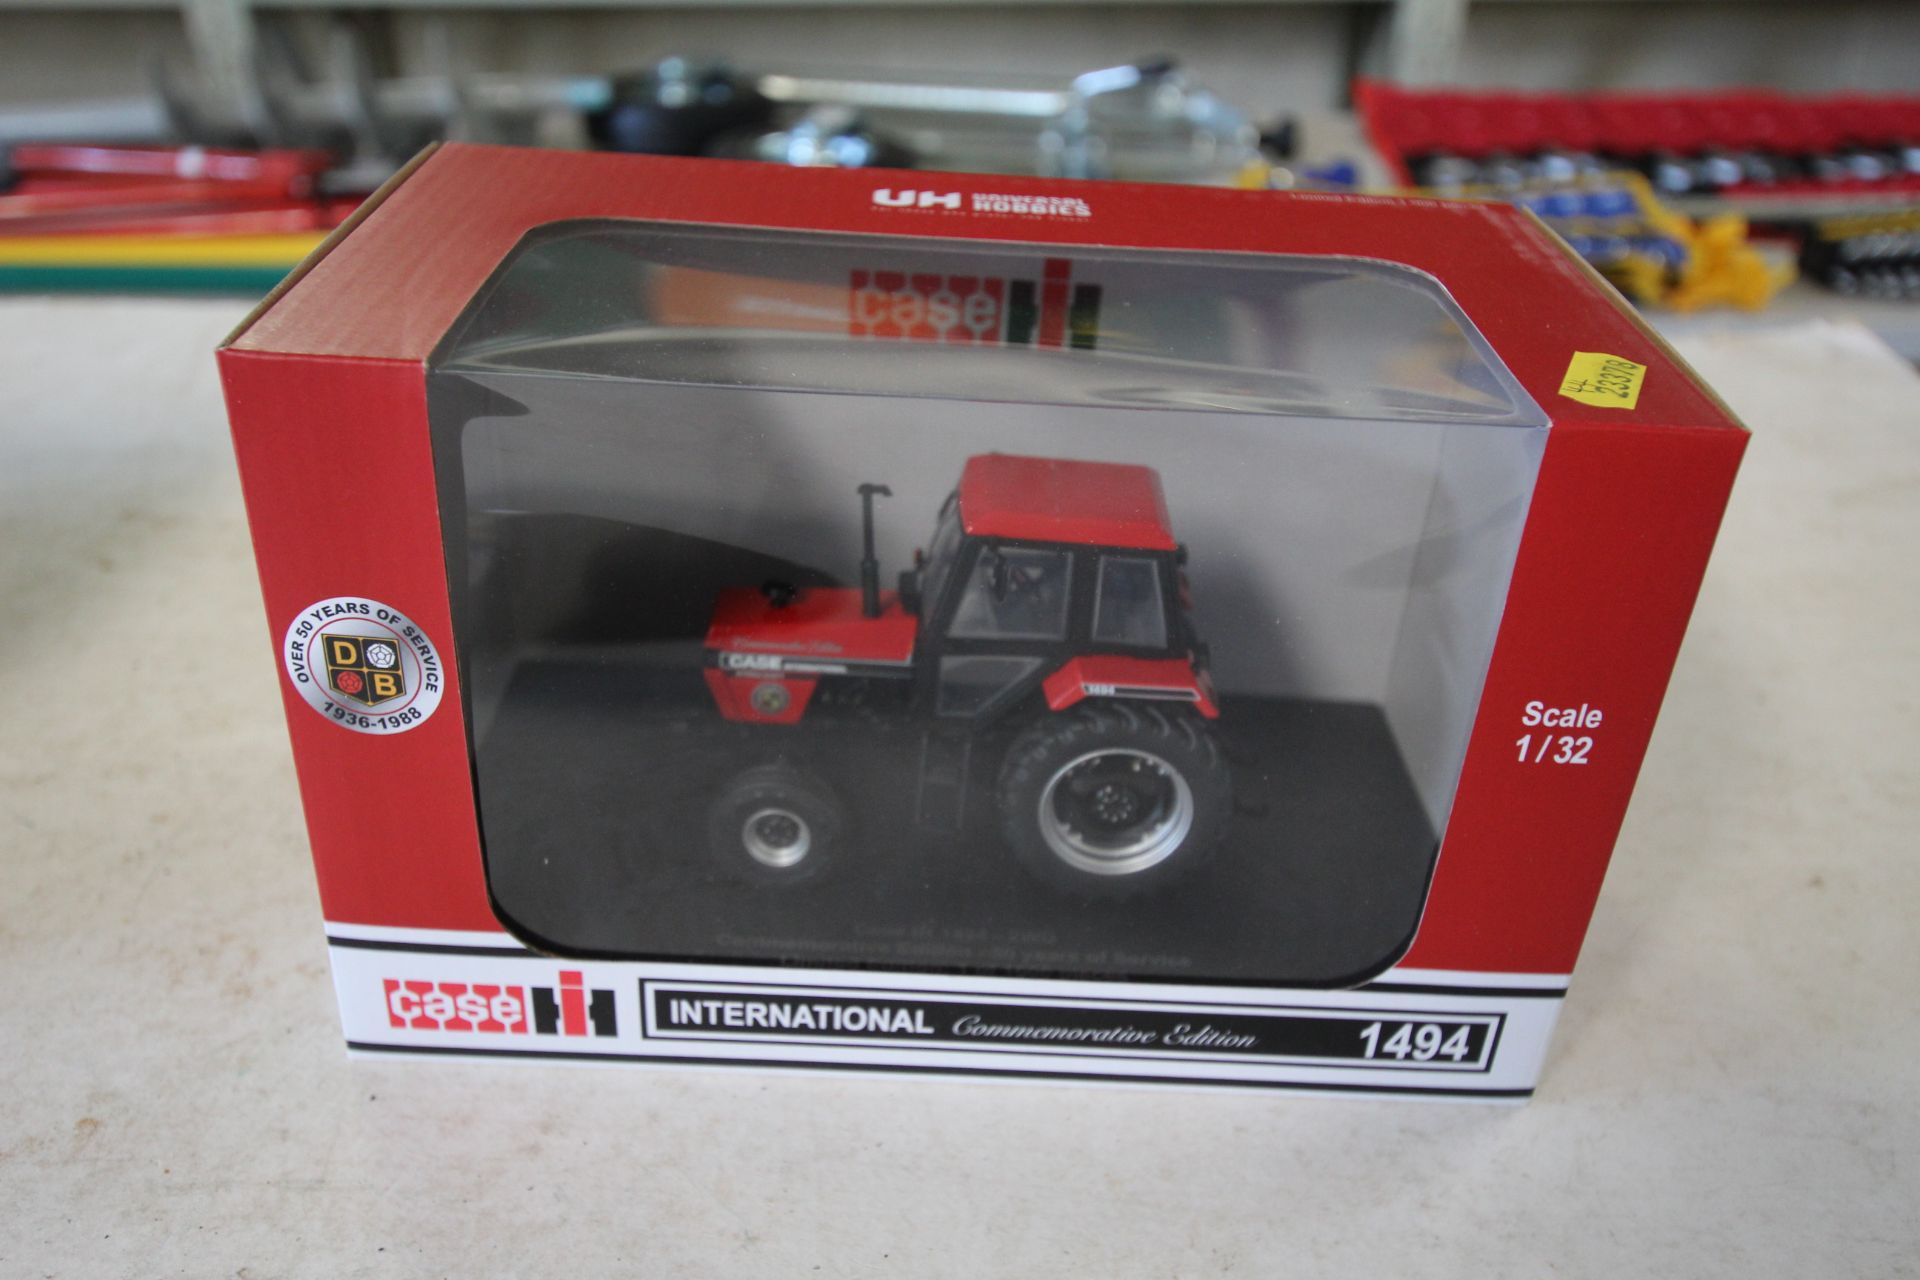 UH Case/IH 1494 2wd Tractor - Commemorative Limited Edition Scale. V